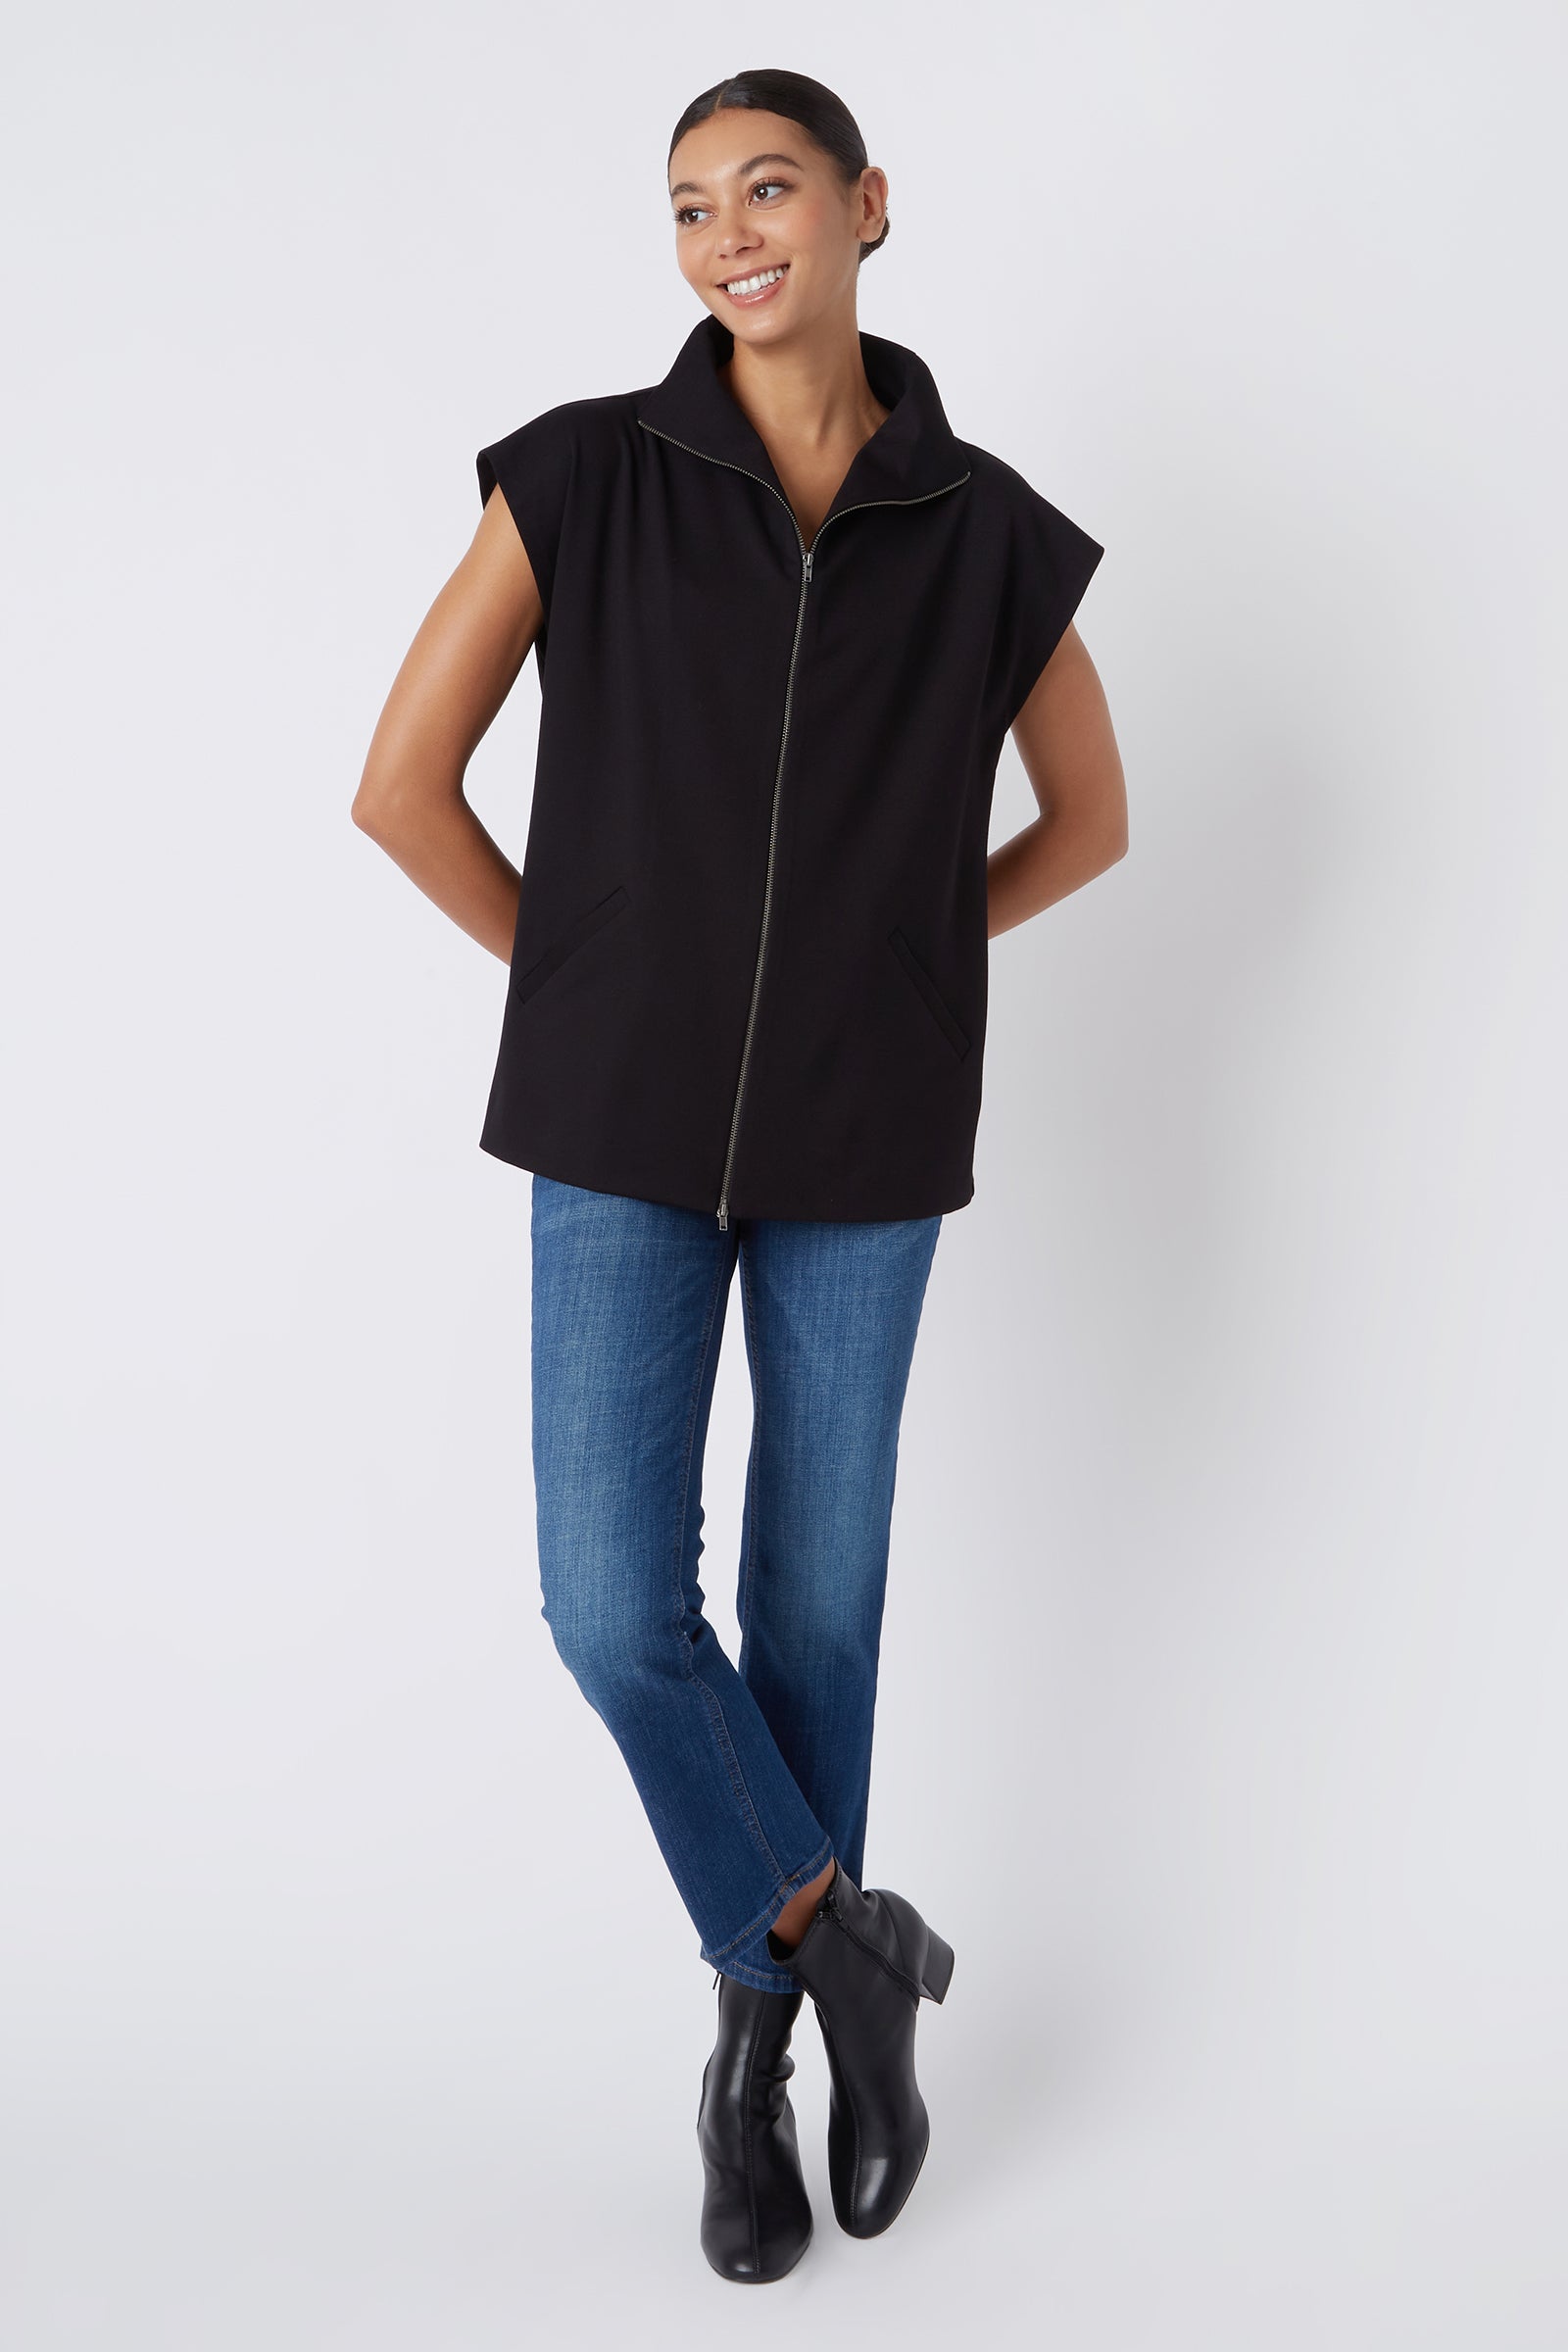 Kal Rieman Anne Collared Zip Vest in Black Ponte on Model Smiling with Hands Behind Back Full Front View